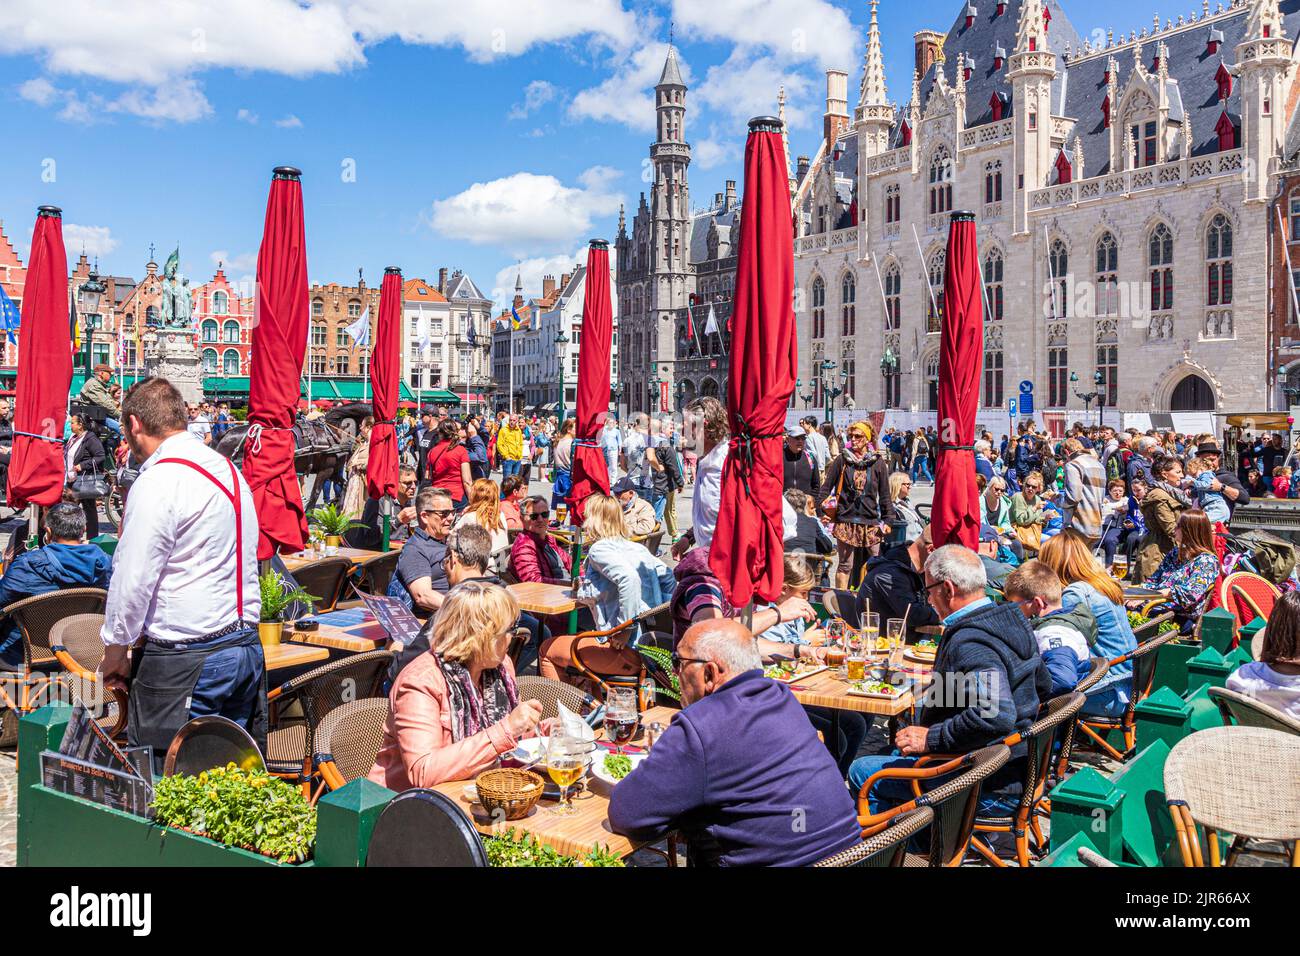 Al fresco cafes in front of he Provinciaal Hof (Province Court) in the Markt Square in Bruges, Belgium Stock Photo